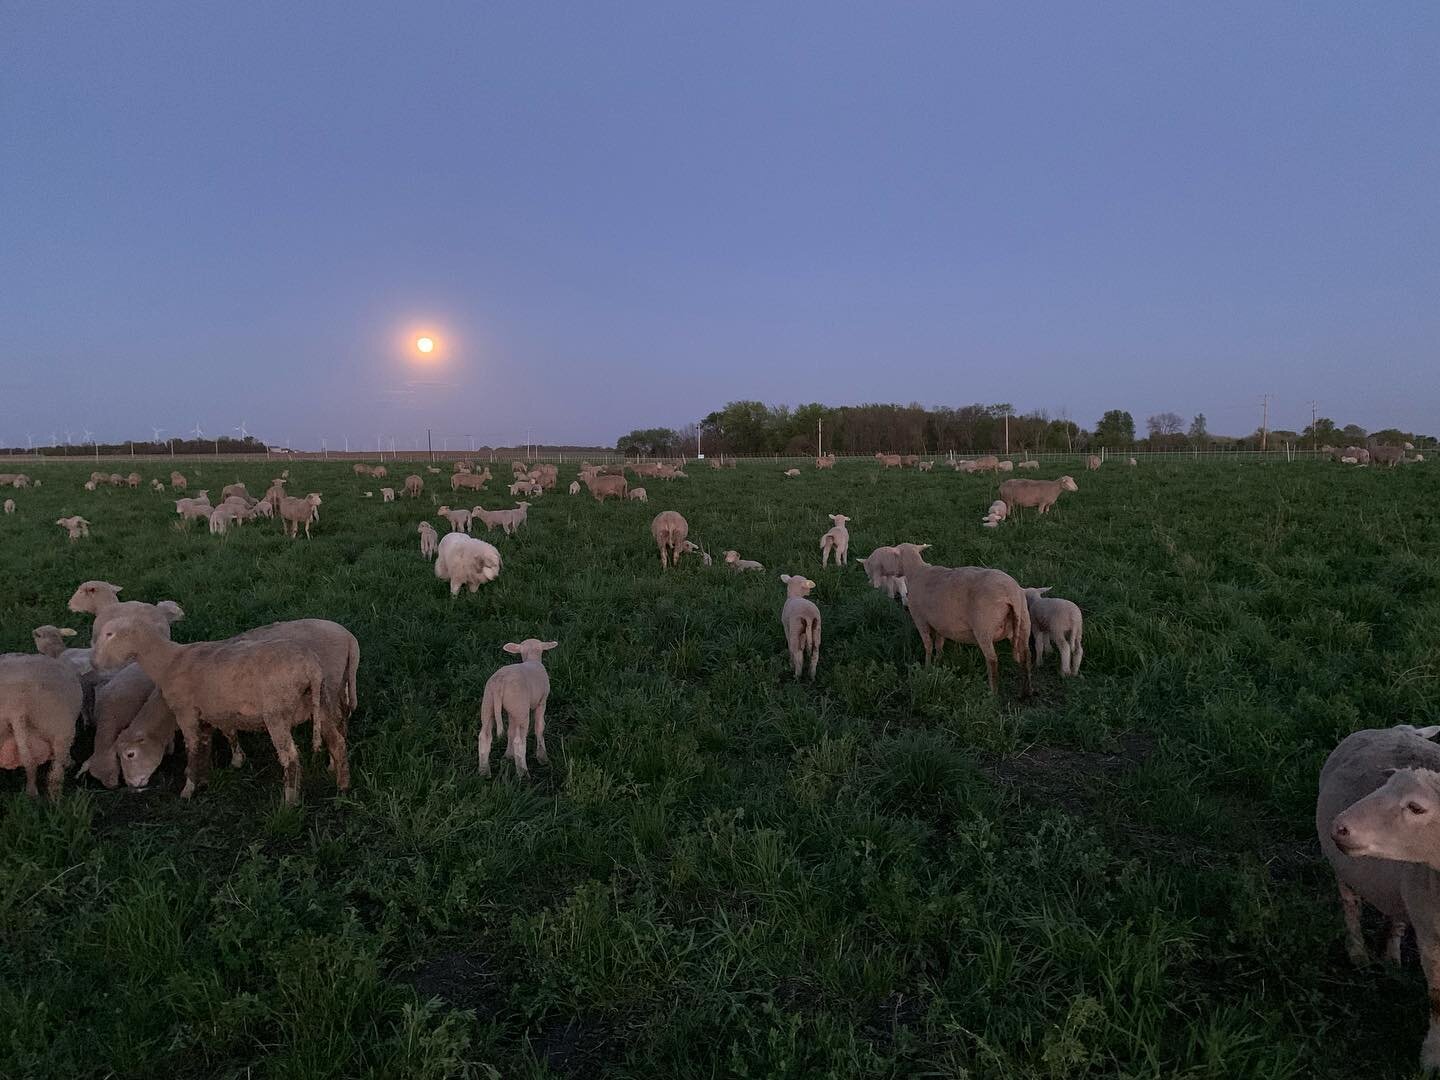 As the gorgeous moon floods Insta feeds, we can&rsquo;t help ourselves but add to the beautiful array of moon pics tonight.

#grazingseasonbegins #underafullmoon #moonsky #grassfedlamb #animalwelfareapproved #climatechangemitigation #changingthelands